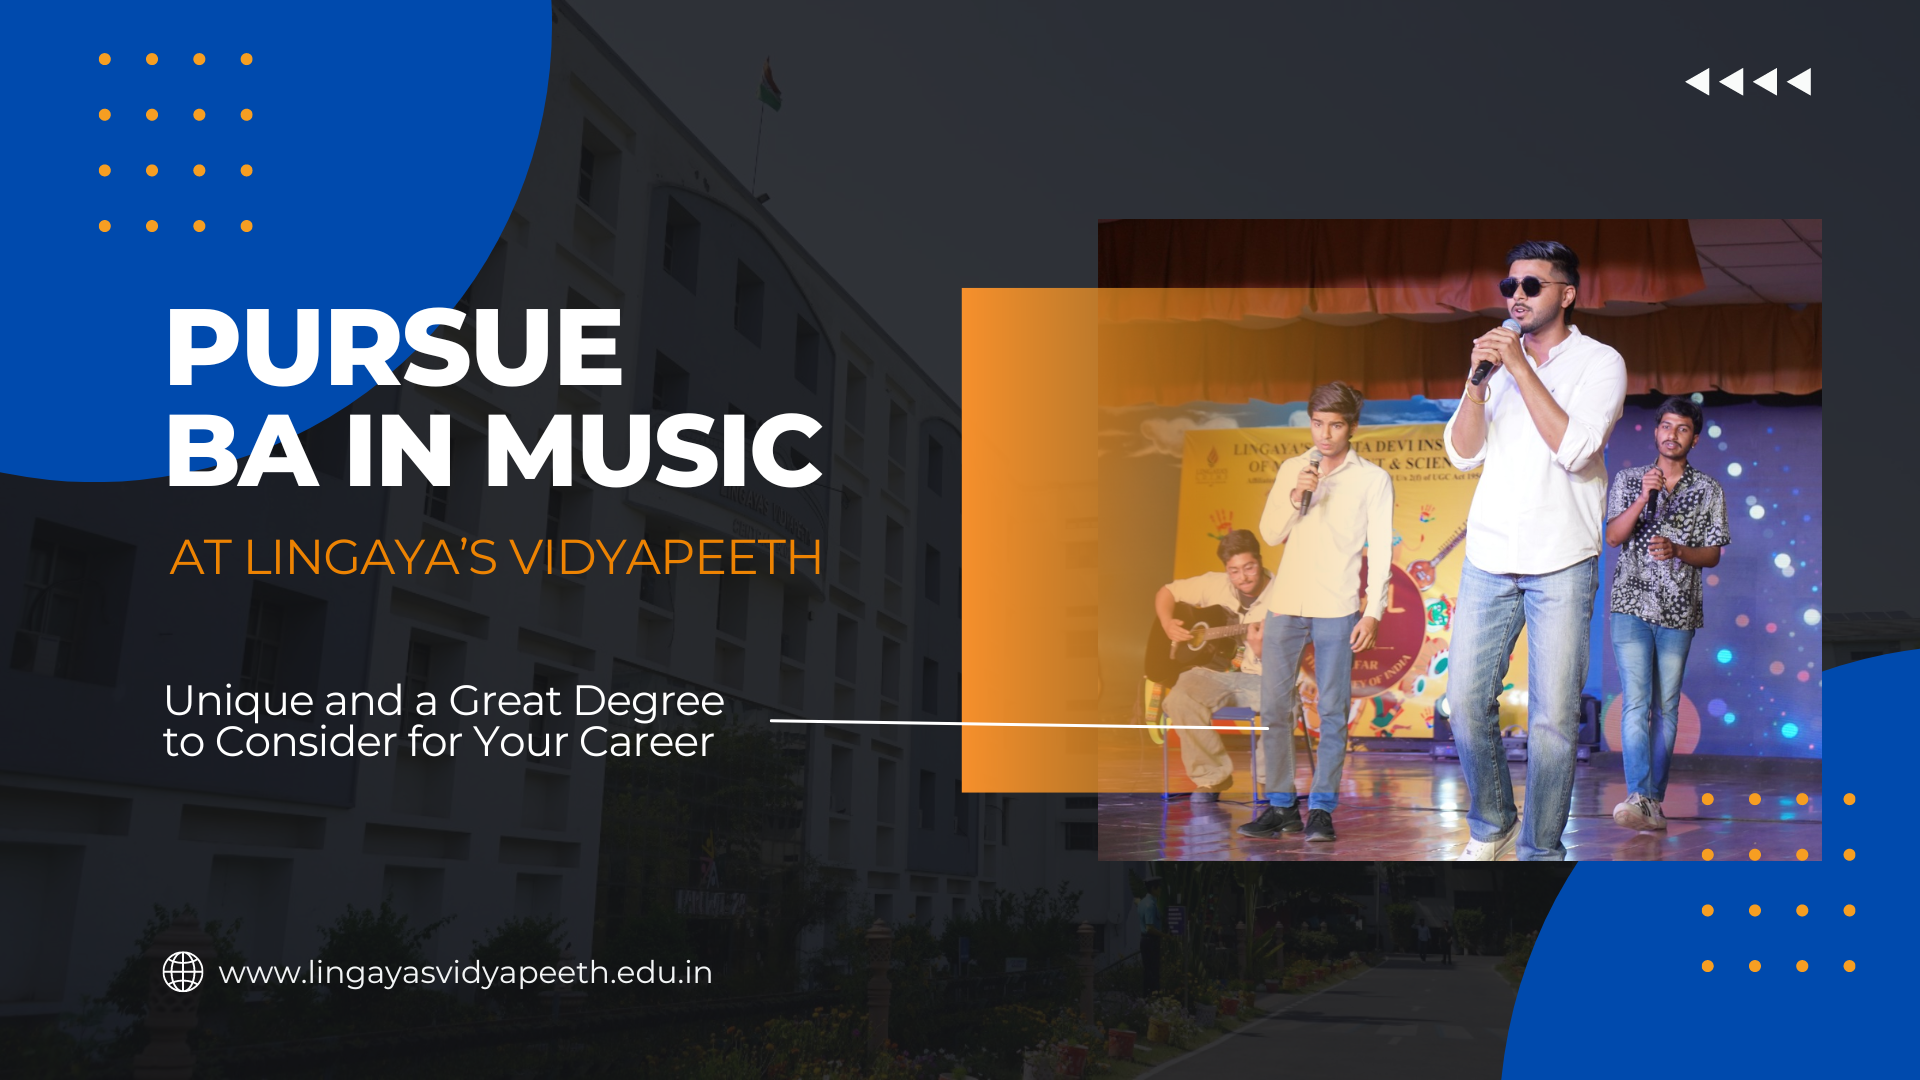 What Makes BA in Music Unique and a Great Degree to Pursue?